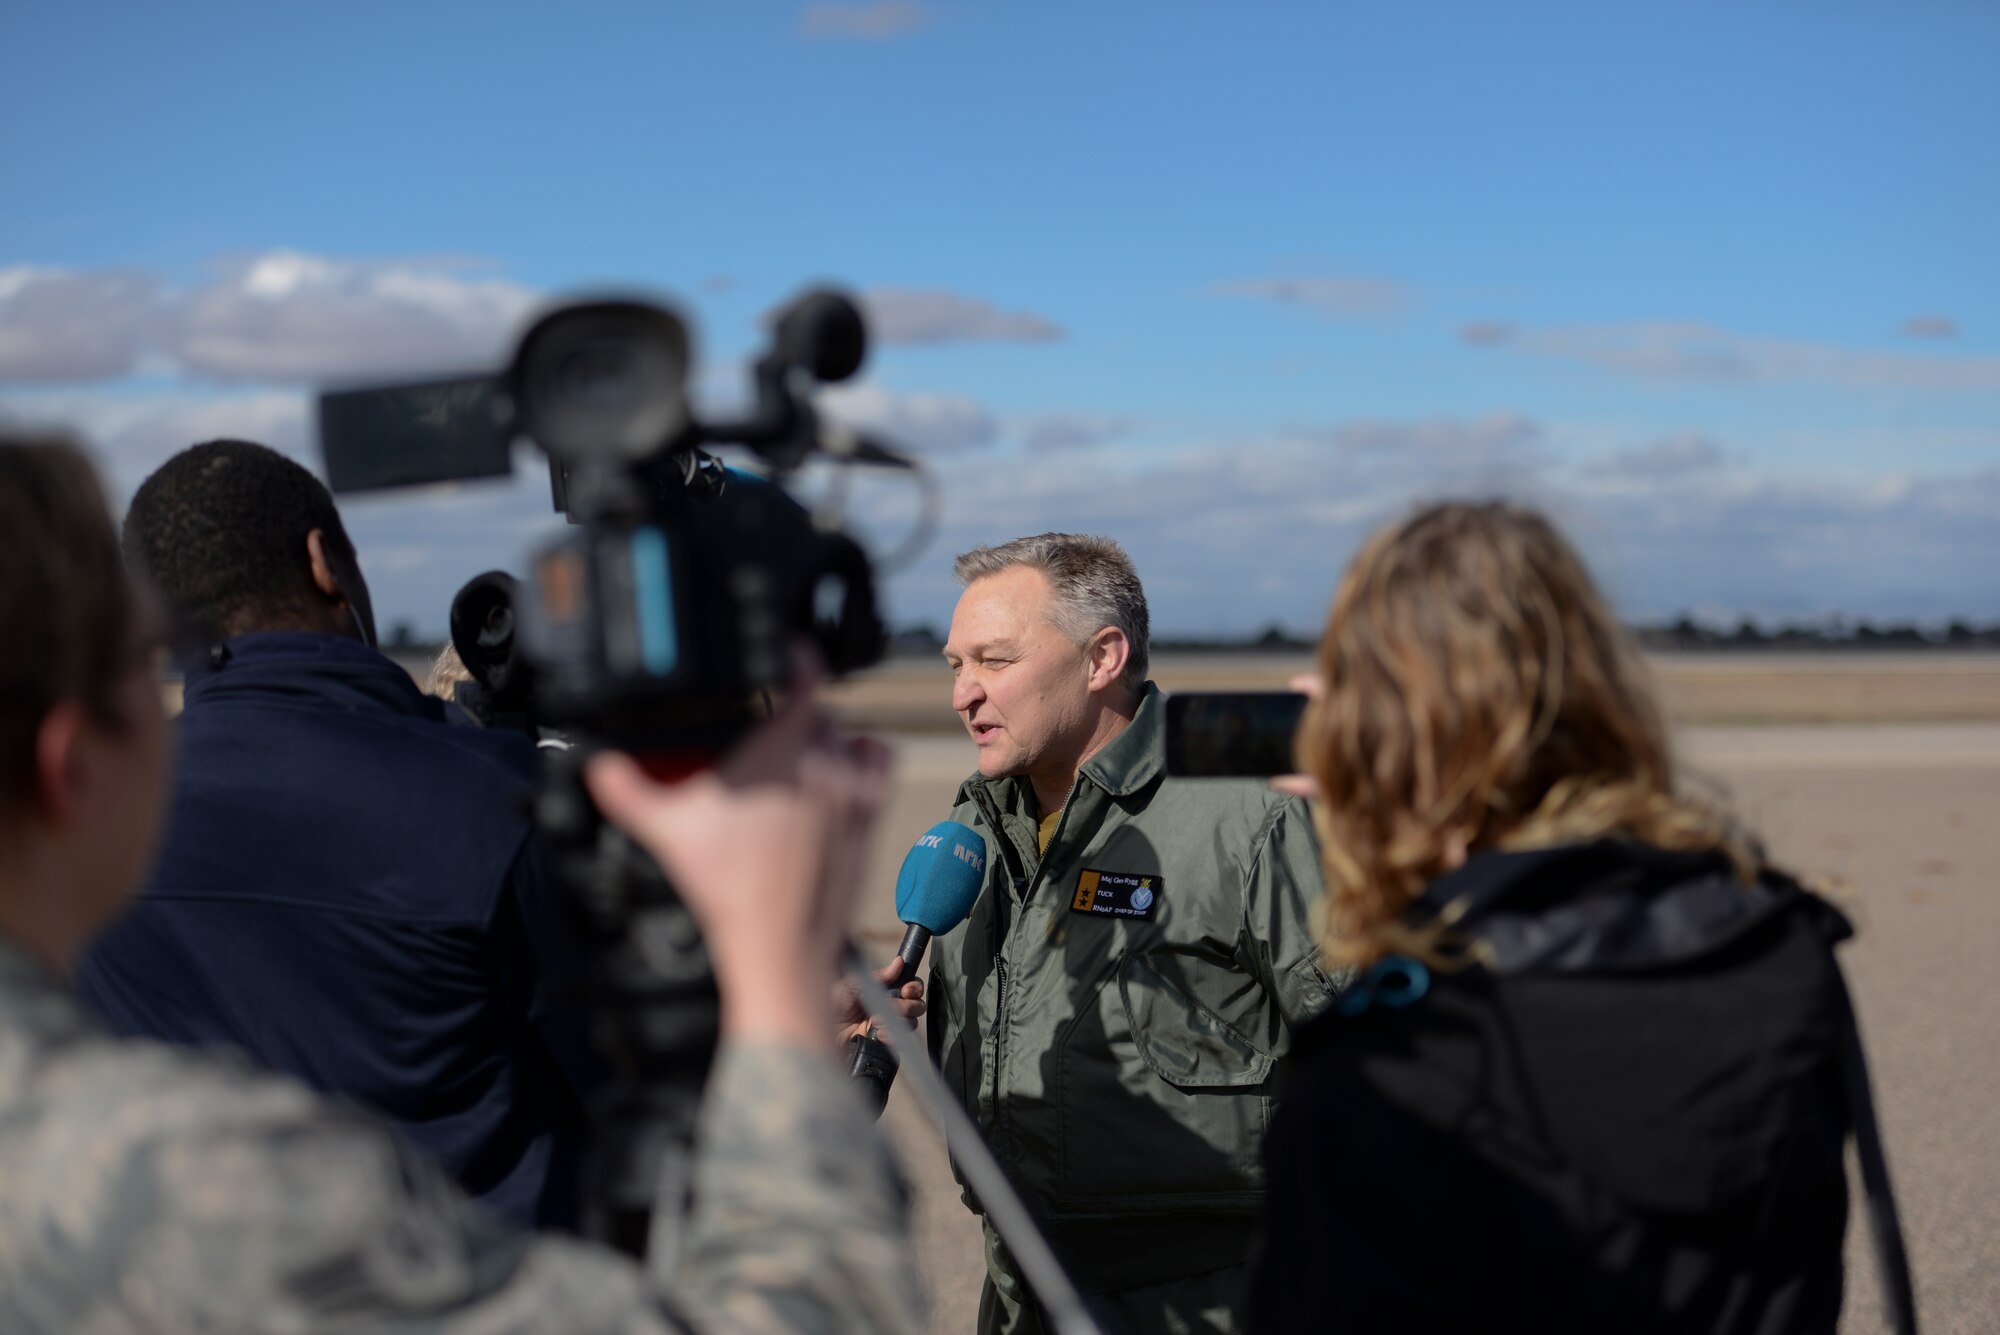 Maj. Gen. Per-Egil Rygg, Chief of Staff of the Royal Norwegian Air Force, conducts an interview for members of the press, Dec. 14, 2015, at Luke Air Force Base. Rygg discussed the significance of the first flight of a Norwegian F-35 by a Norwegian pilot, Maj. Morten Hanche. (U.S. Air Force photo by Airman 1st Class Ridge Shan)